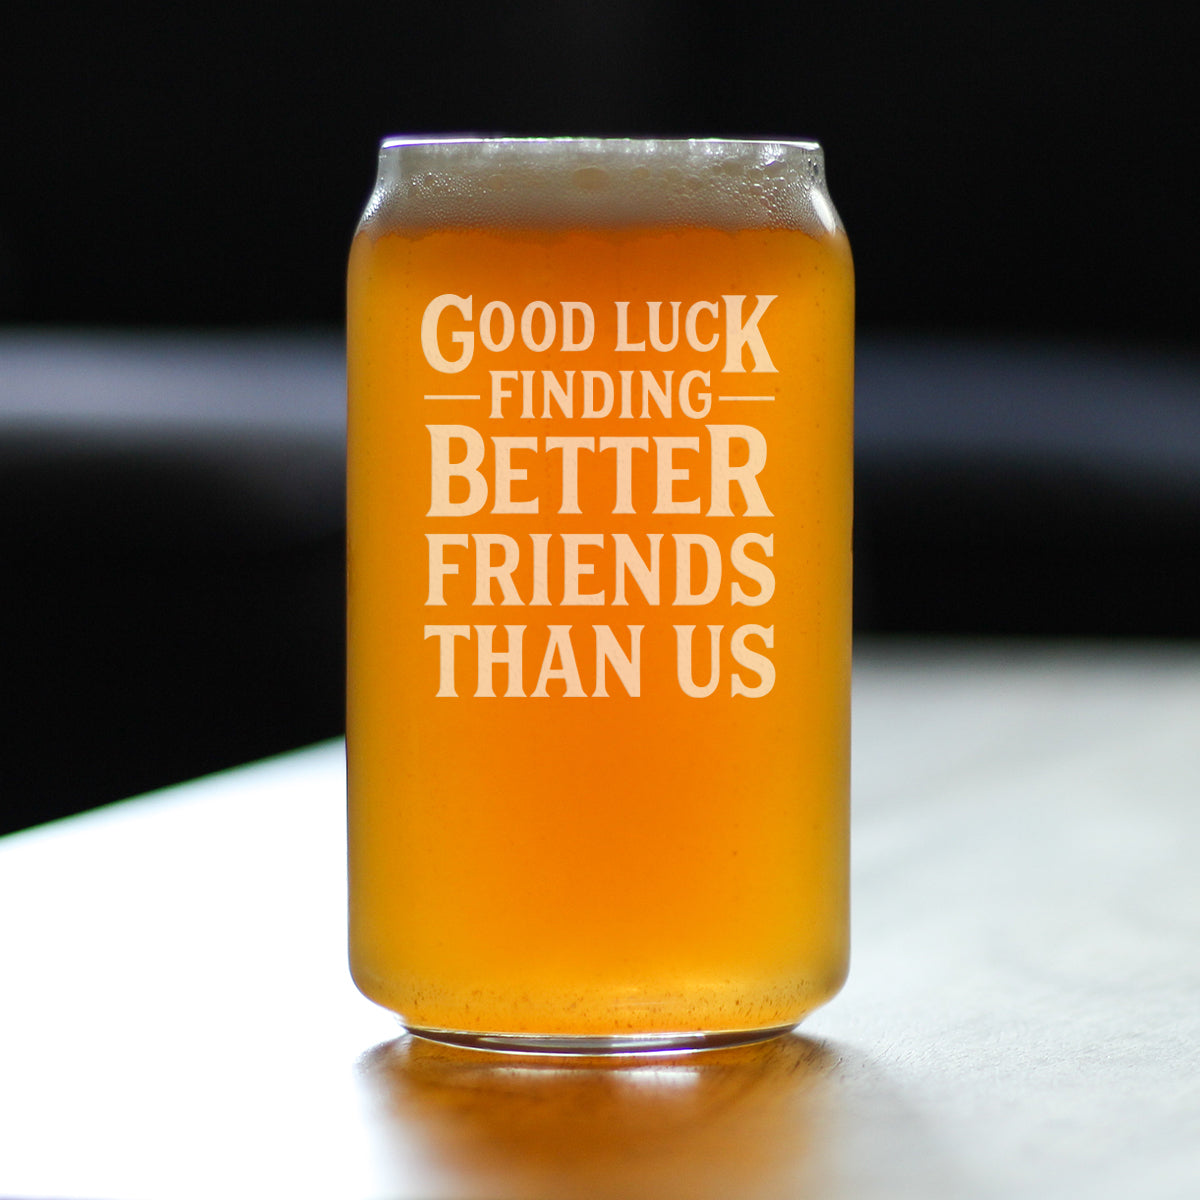 Good Luck Finding Better Friends Than Us - Beer Can Pint Glass - Funny Farewell Gift For Best Friend Moving Away - 16 oz Glasses